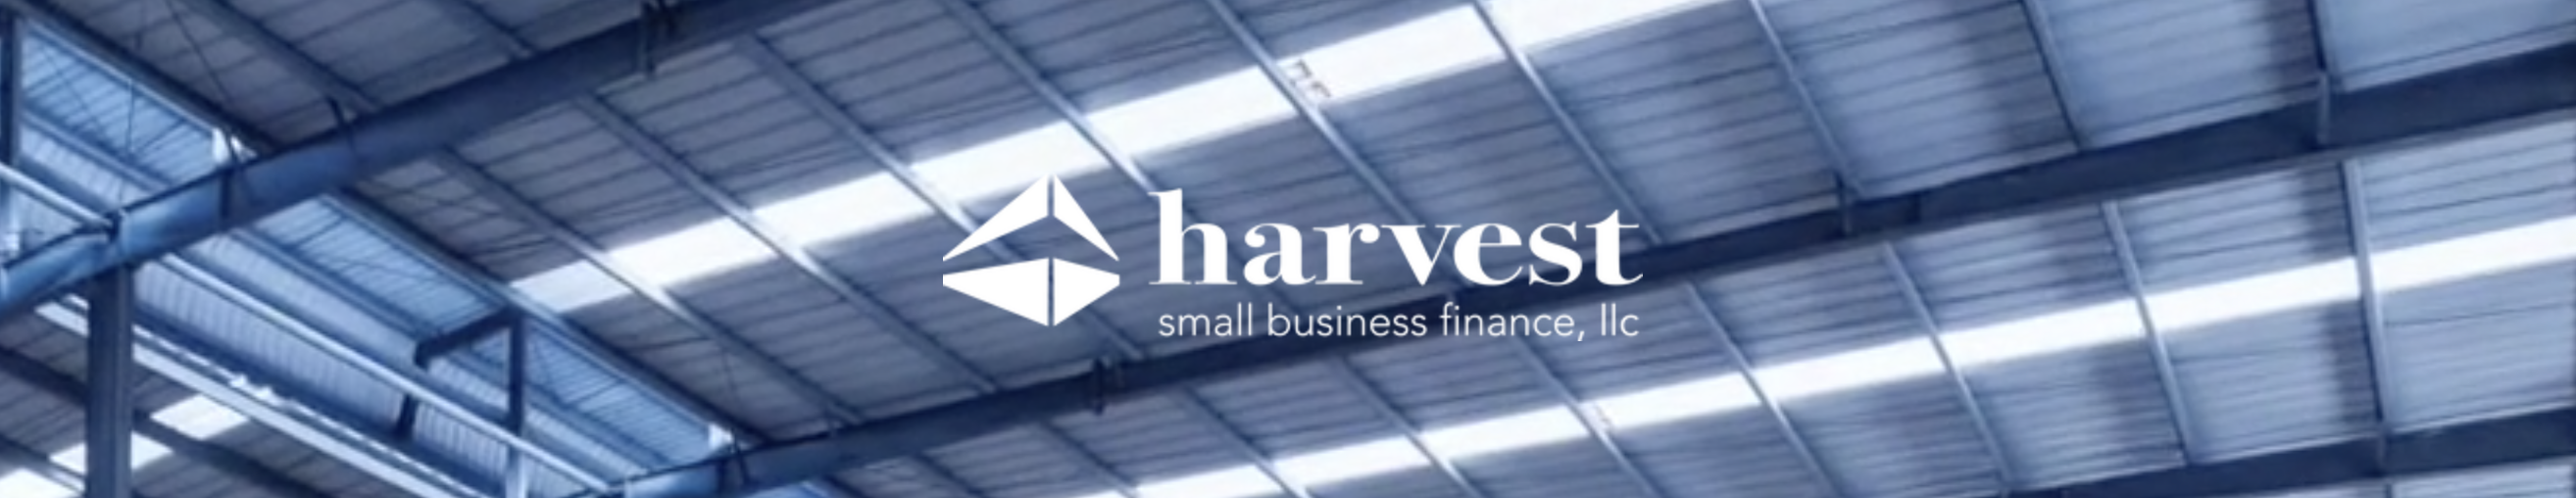 harvest-small-business-finance-llc-closes-its-second-securitization-of-owner-occupied-first-lien-sba-7a-unguaranteed-portions